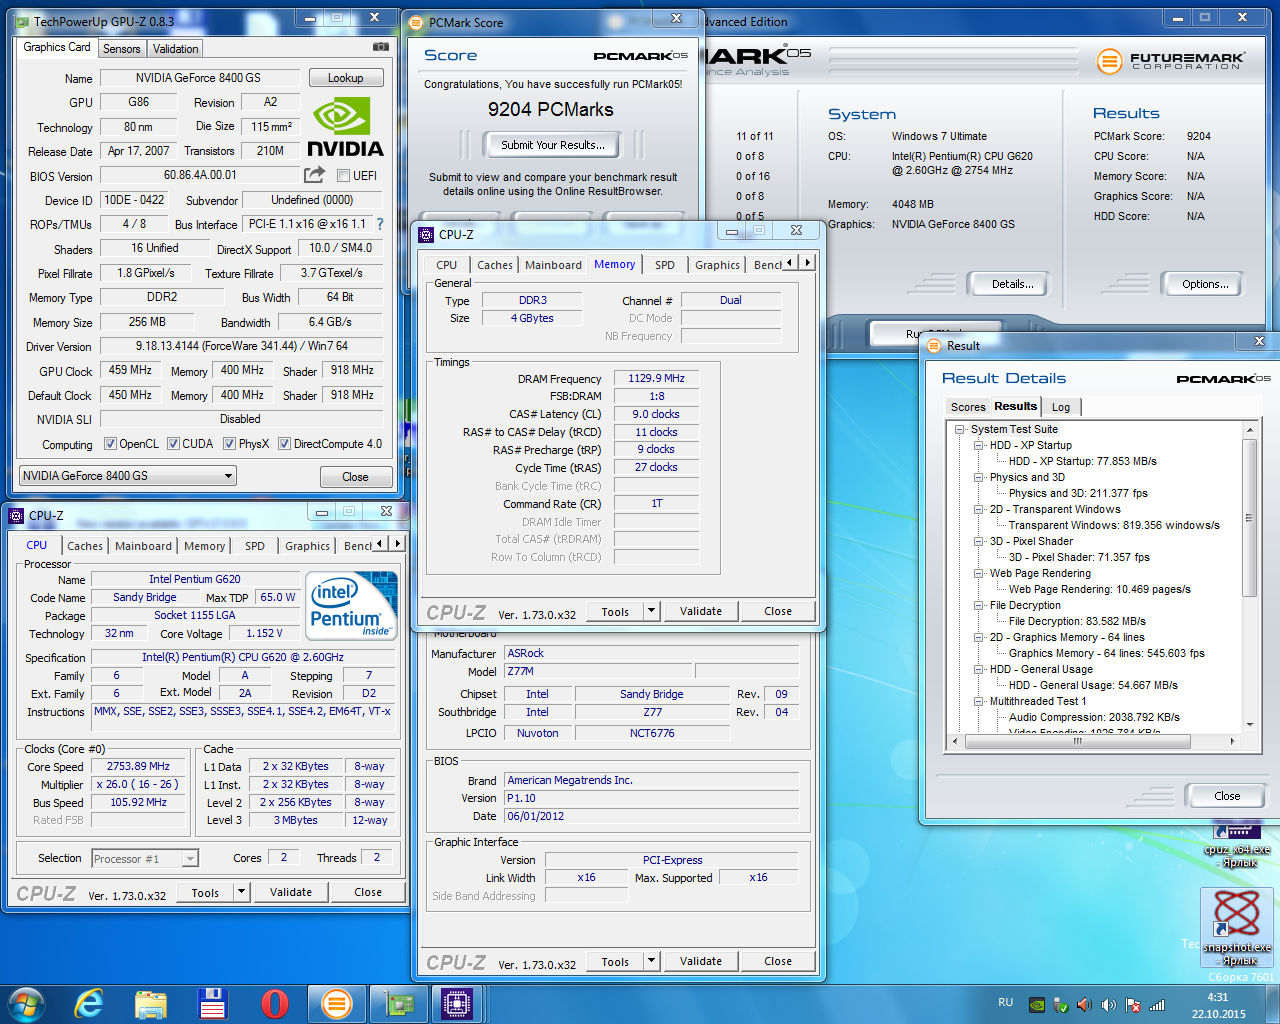 viper-rd`s PCMark05 (alpha) score: 9204 marks with a Pentium G620